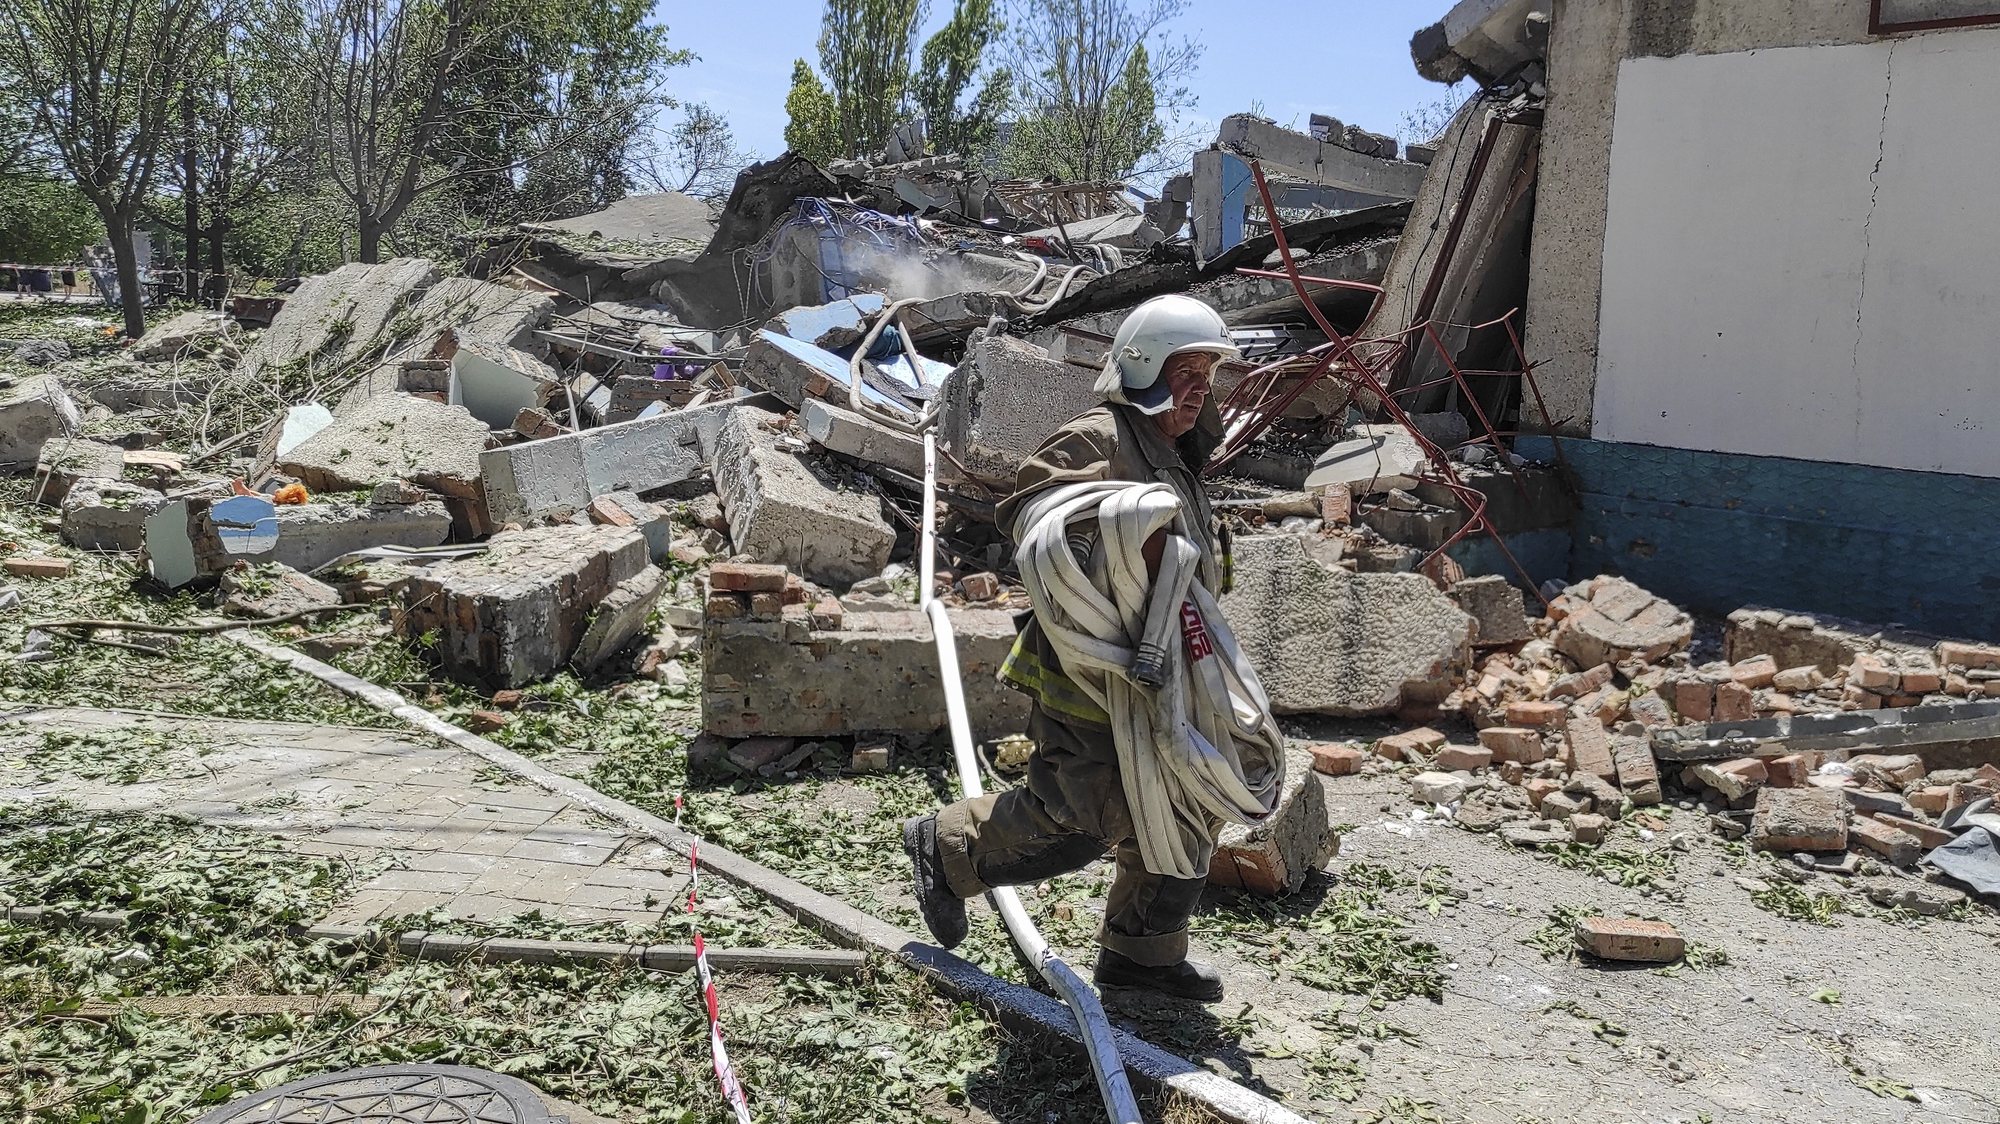 epa10045459 A rescuer works at the scene of a damaged residential building after shelling hit the small town of Serhiivka near Odesa, southern Ukraine, 01 July 2022. At least 19 people were killed and 38 others injured, including six children, after overnight shelling hit a nine-story building and two holiday hotels in Serhiivka, Bilhorod-Dnistrovskyi district, Odesa region, the state emergency service said in a statement on 01 July.  EPA/STRINGER